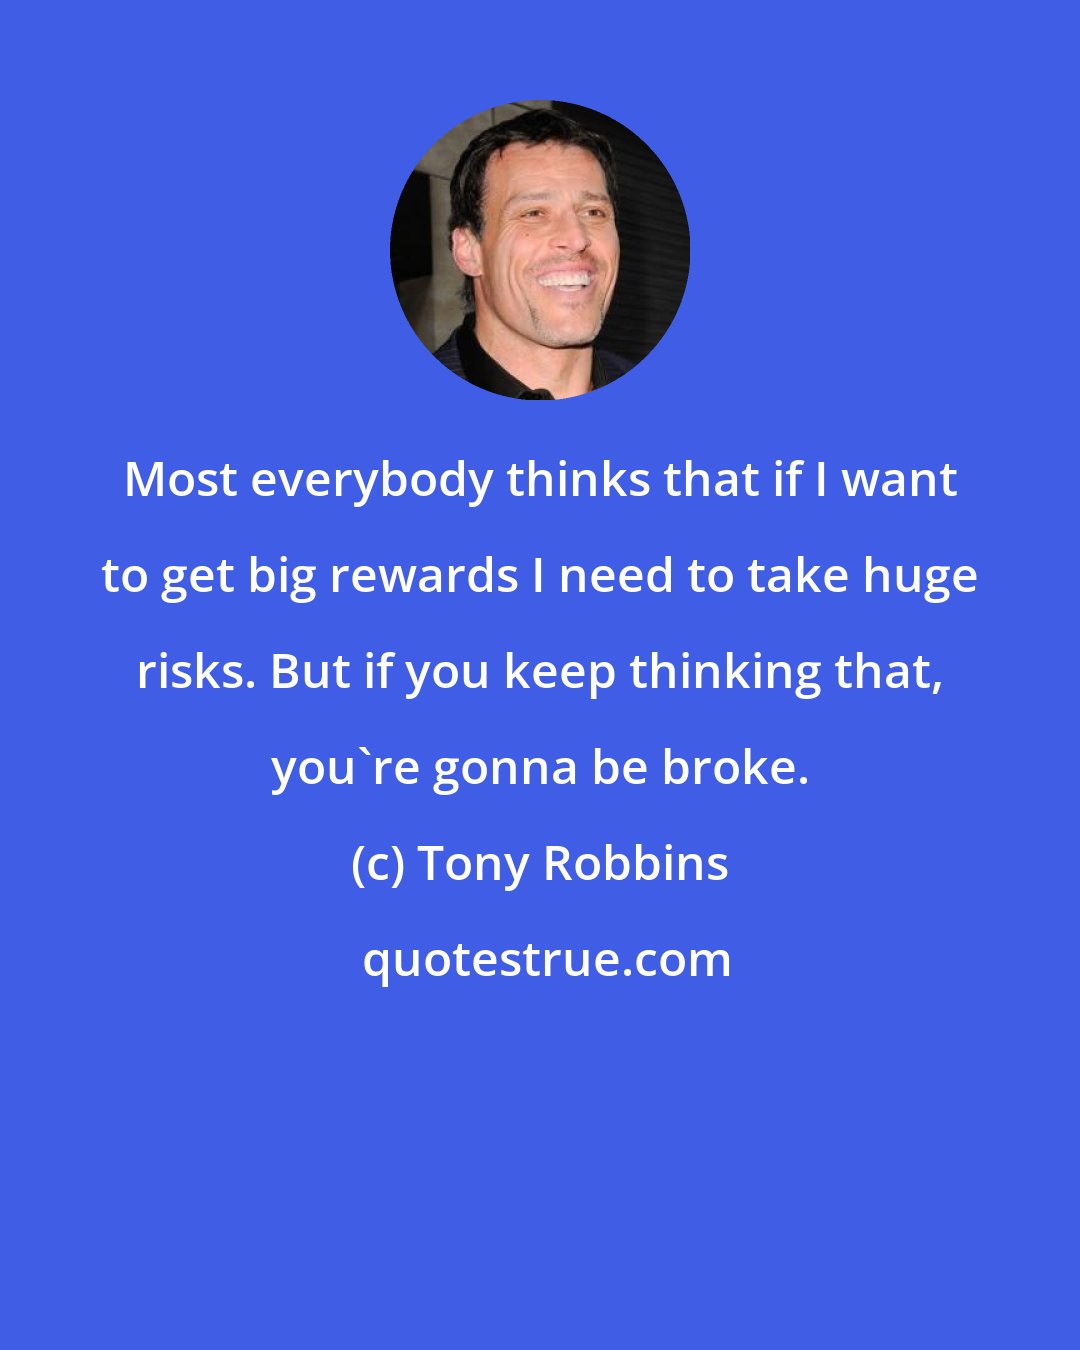 Tony Robbins: Most everybody thinks that if I want to get big rewards I need to take huge risks. But if you keep thinking that, you're gonna be broke.